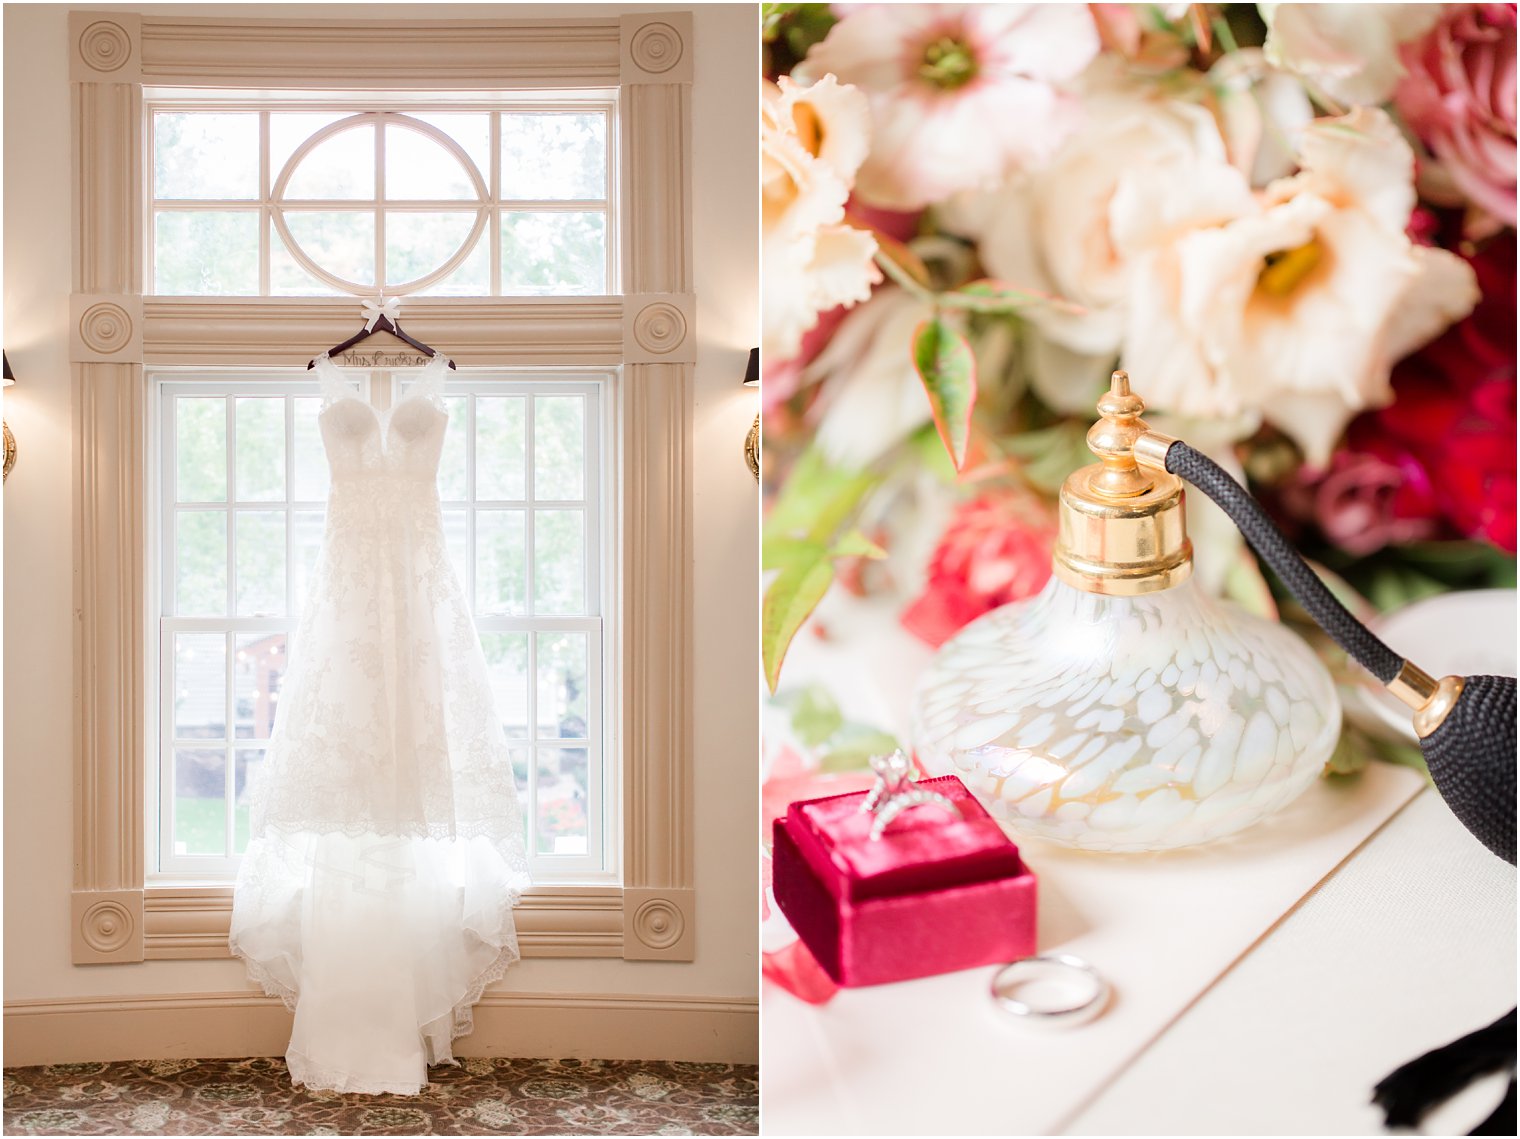 Pronovias wedding gown at Olde Mill Inn photographed by Idalia Photography